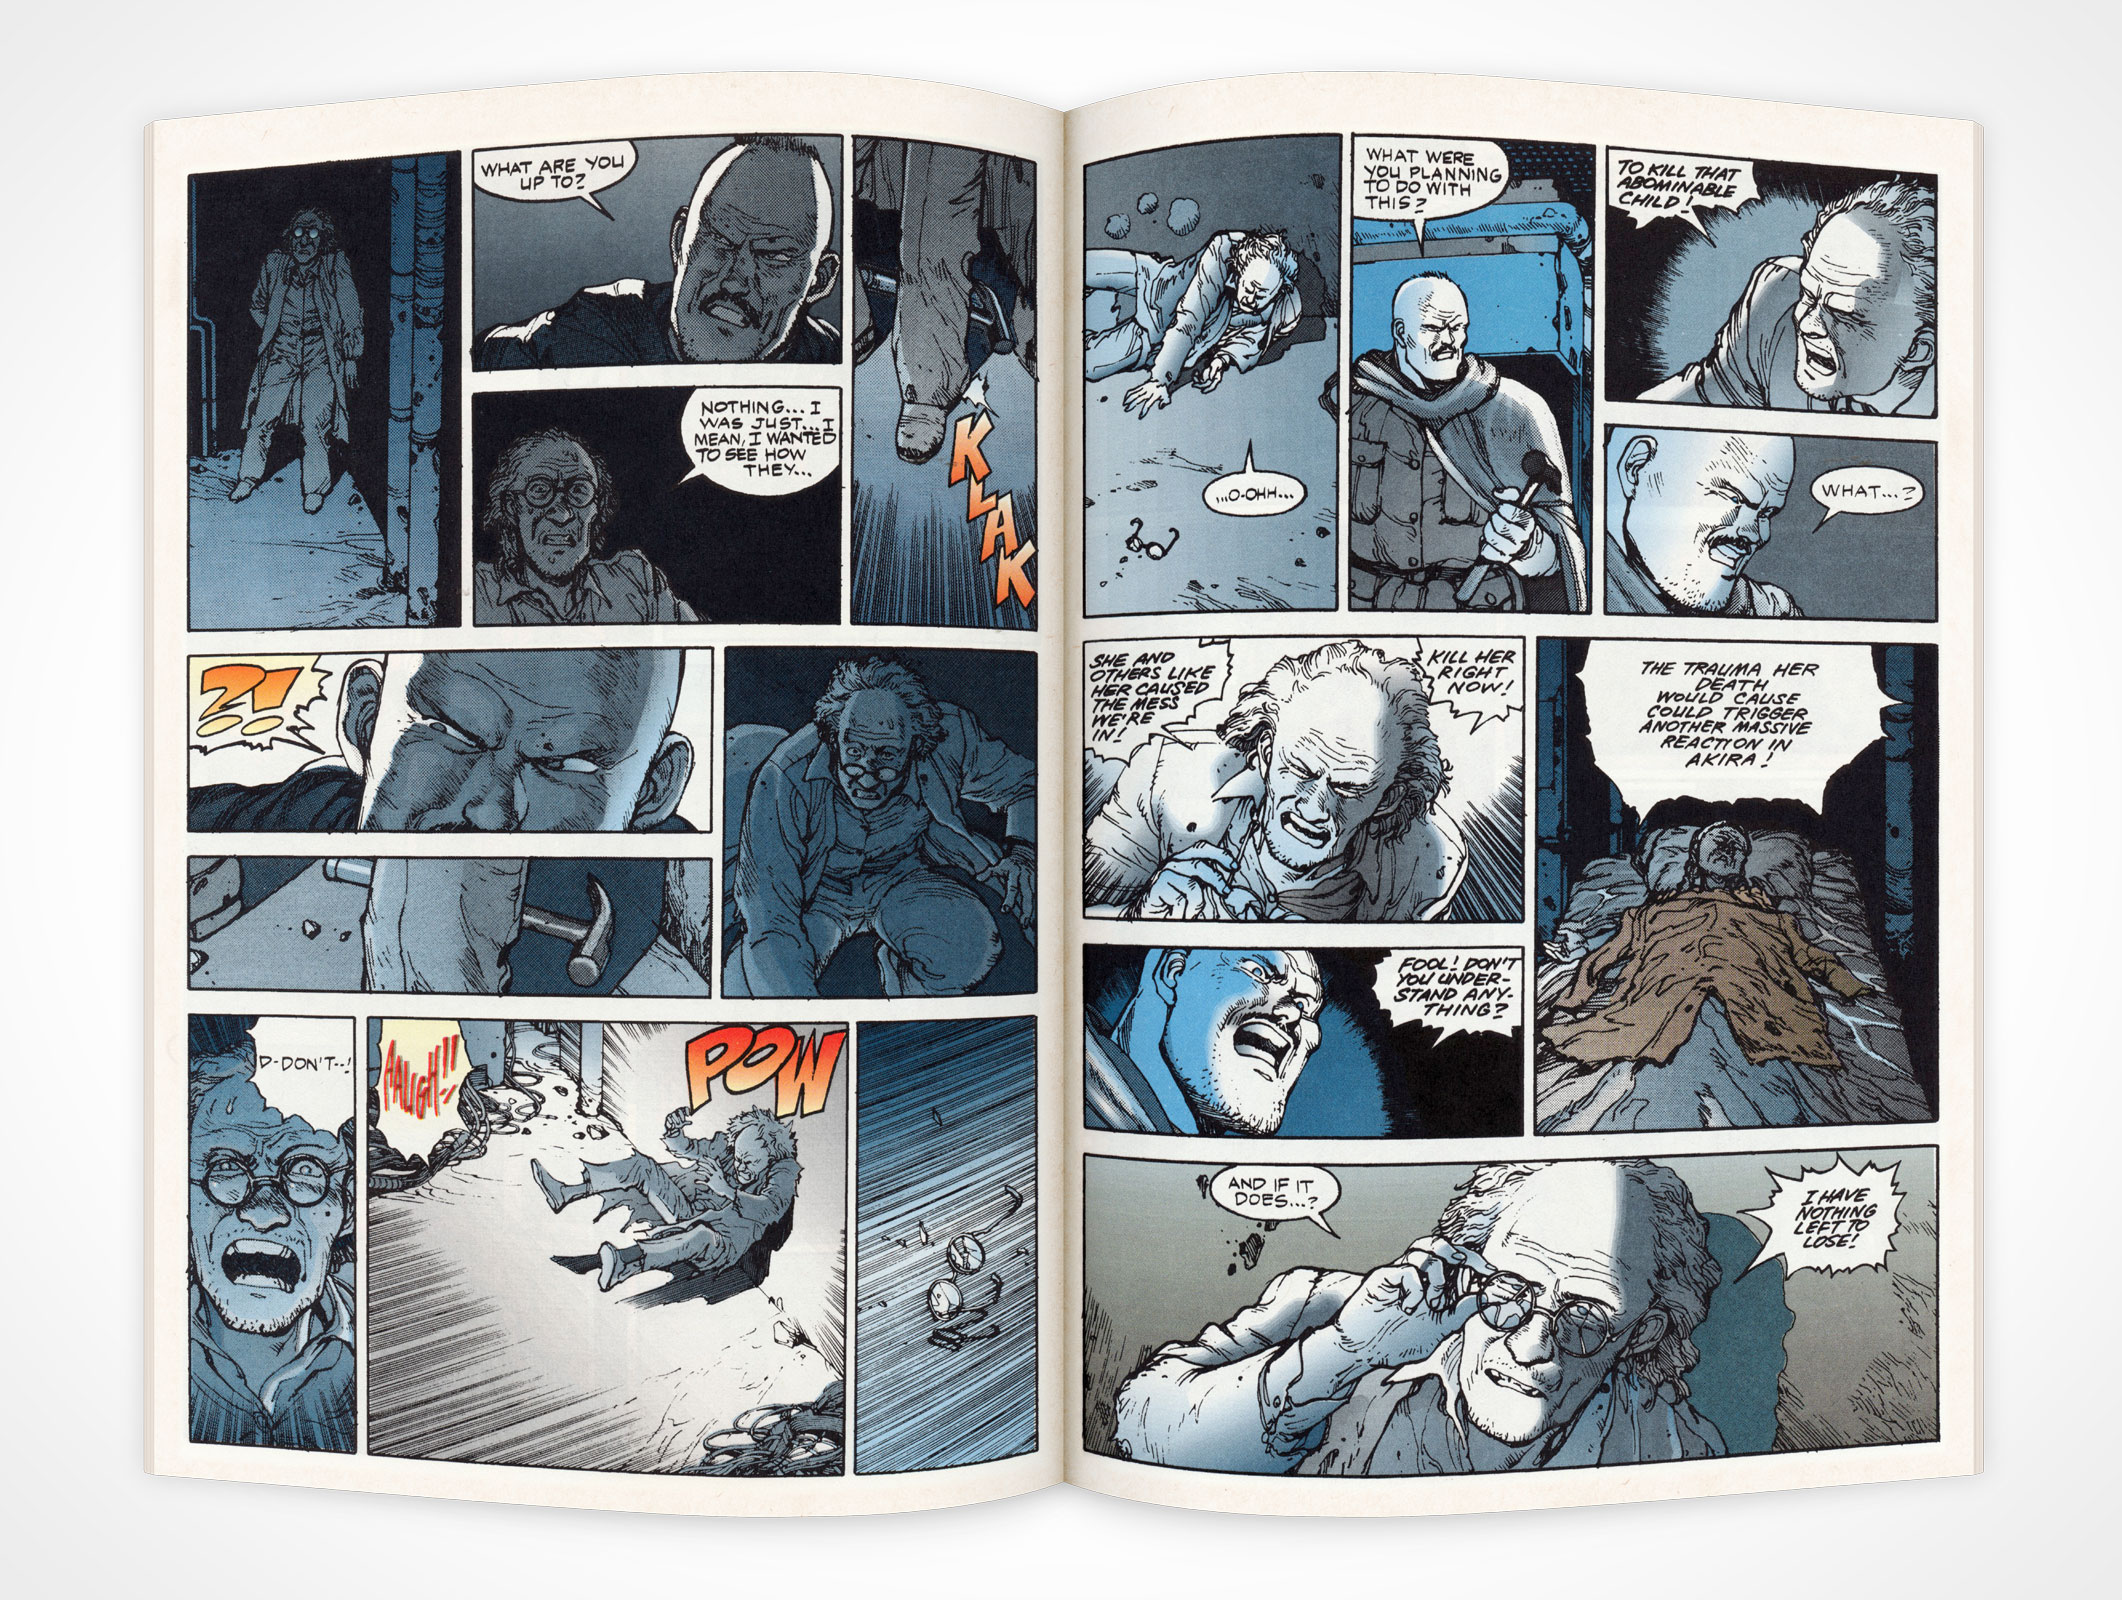 An open comic book mockup displaying a sequence of illustrated panels with a character experiencing a range of intense emotions, leading to a climactic moment.